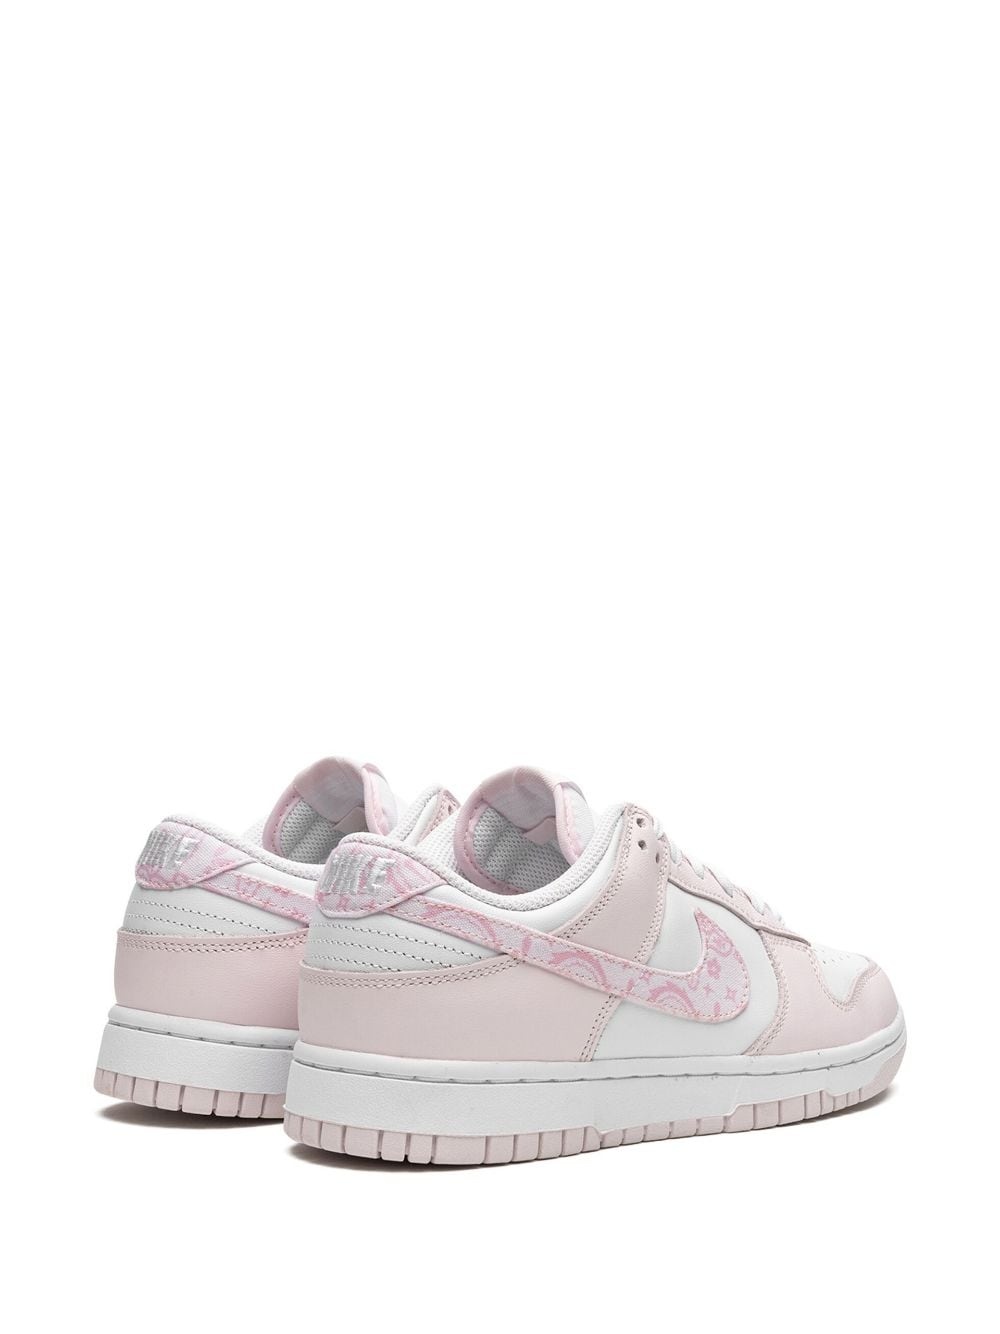 Dunk Low "Pink Paisley" sneakers - 3